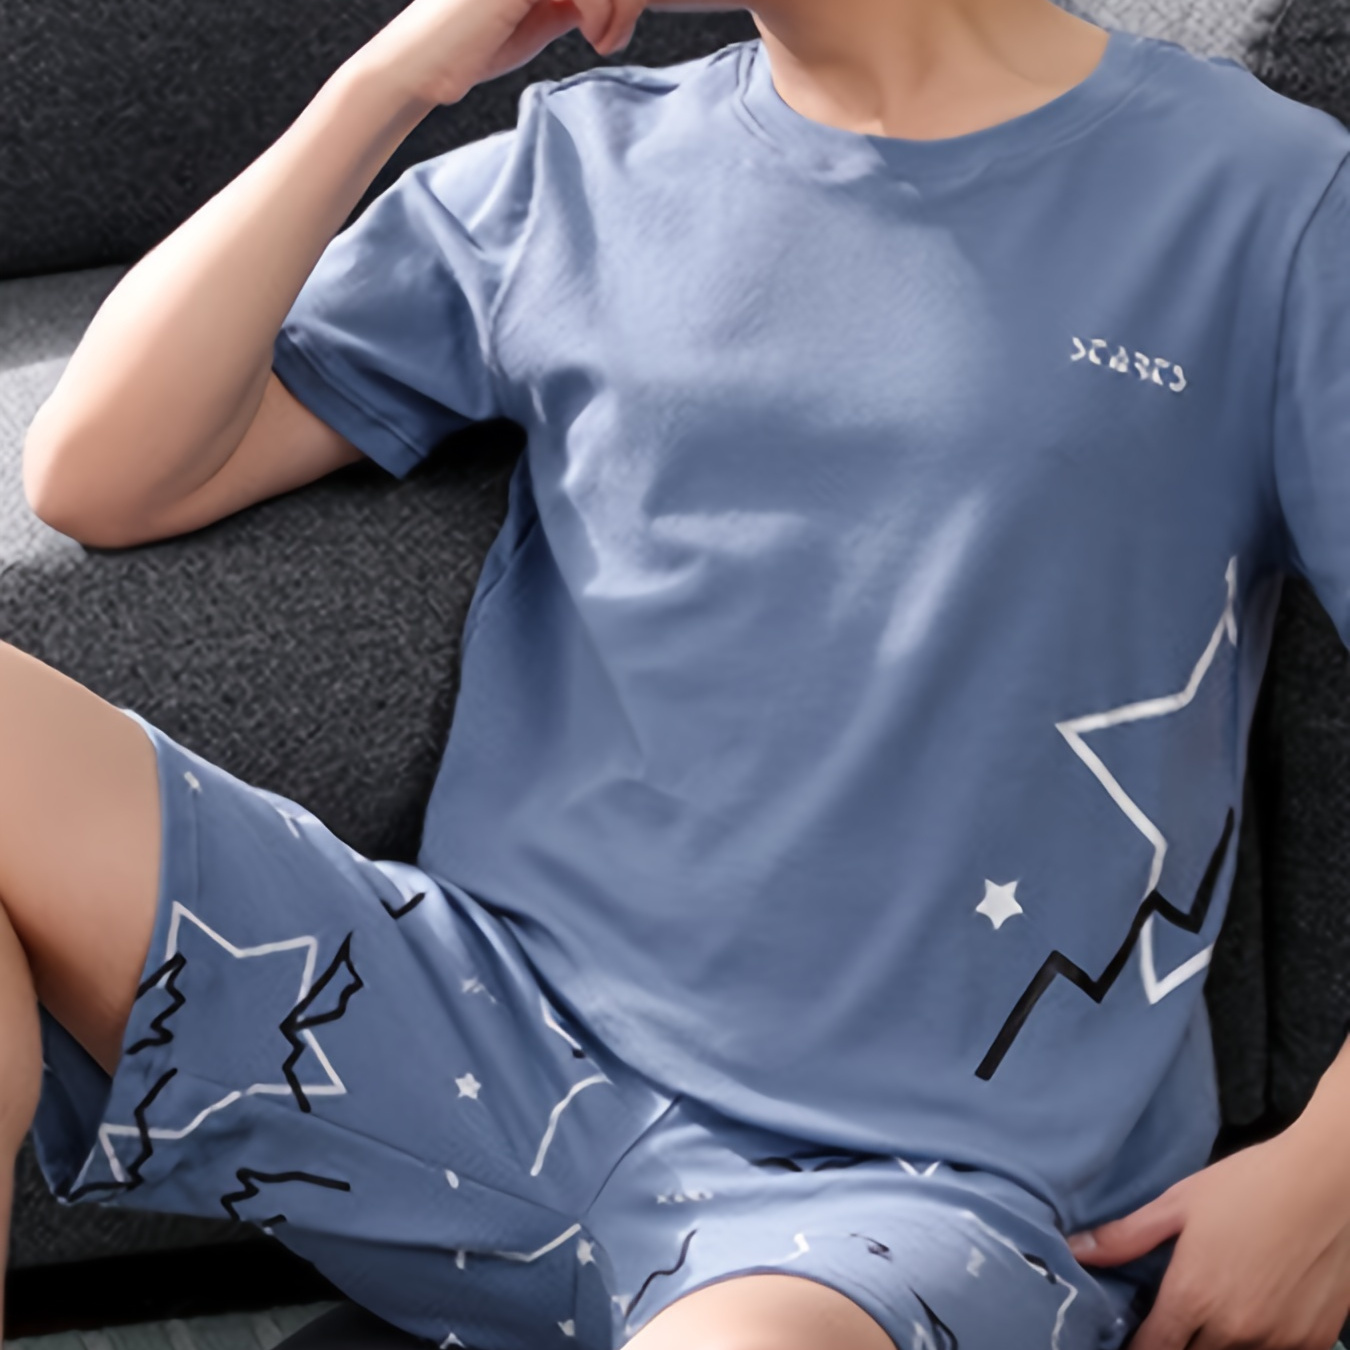 

Men's Trendy Casual Comfy Tees & Shorts, Star Graphic Print Crew Neck Short Sleeve T-shirt & Loose Shorts Home Pajamas Sets, Outdoor Sets For Summer